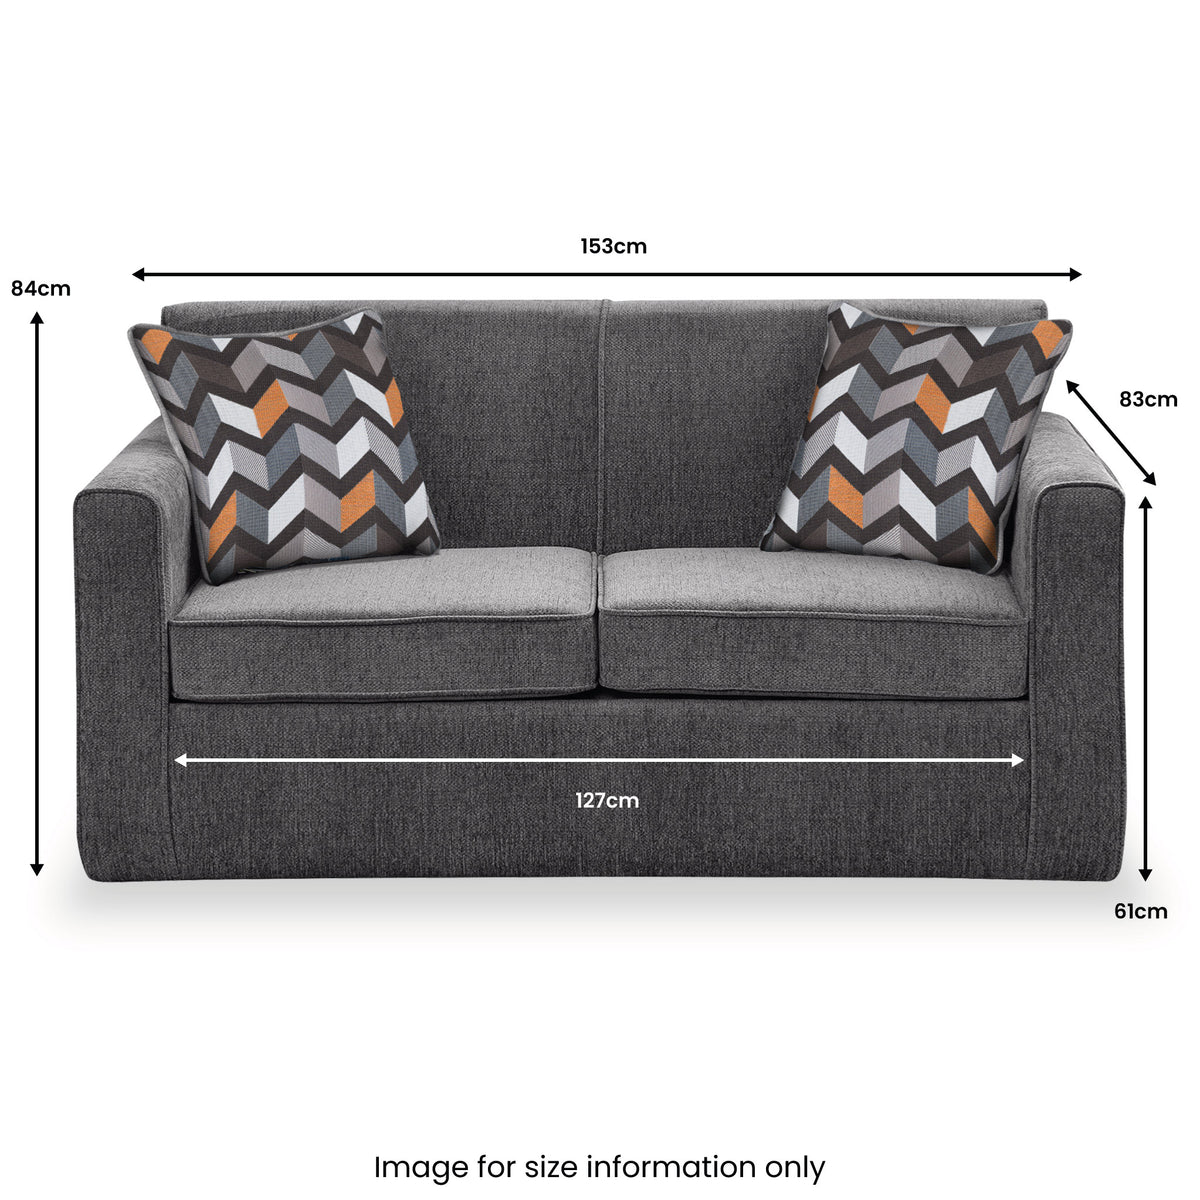 Welton Soft Weave 2 Seater Sofa Bed Dimensions by Roseland Furniture